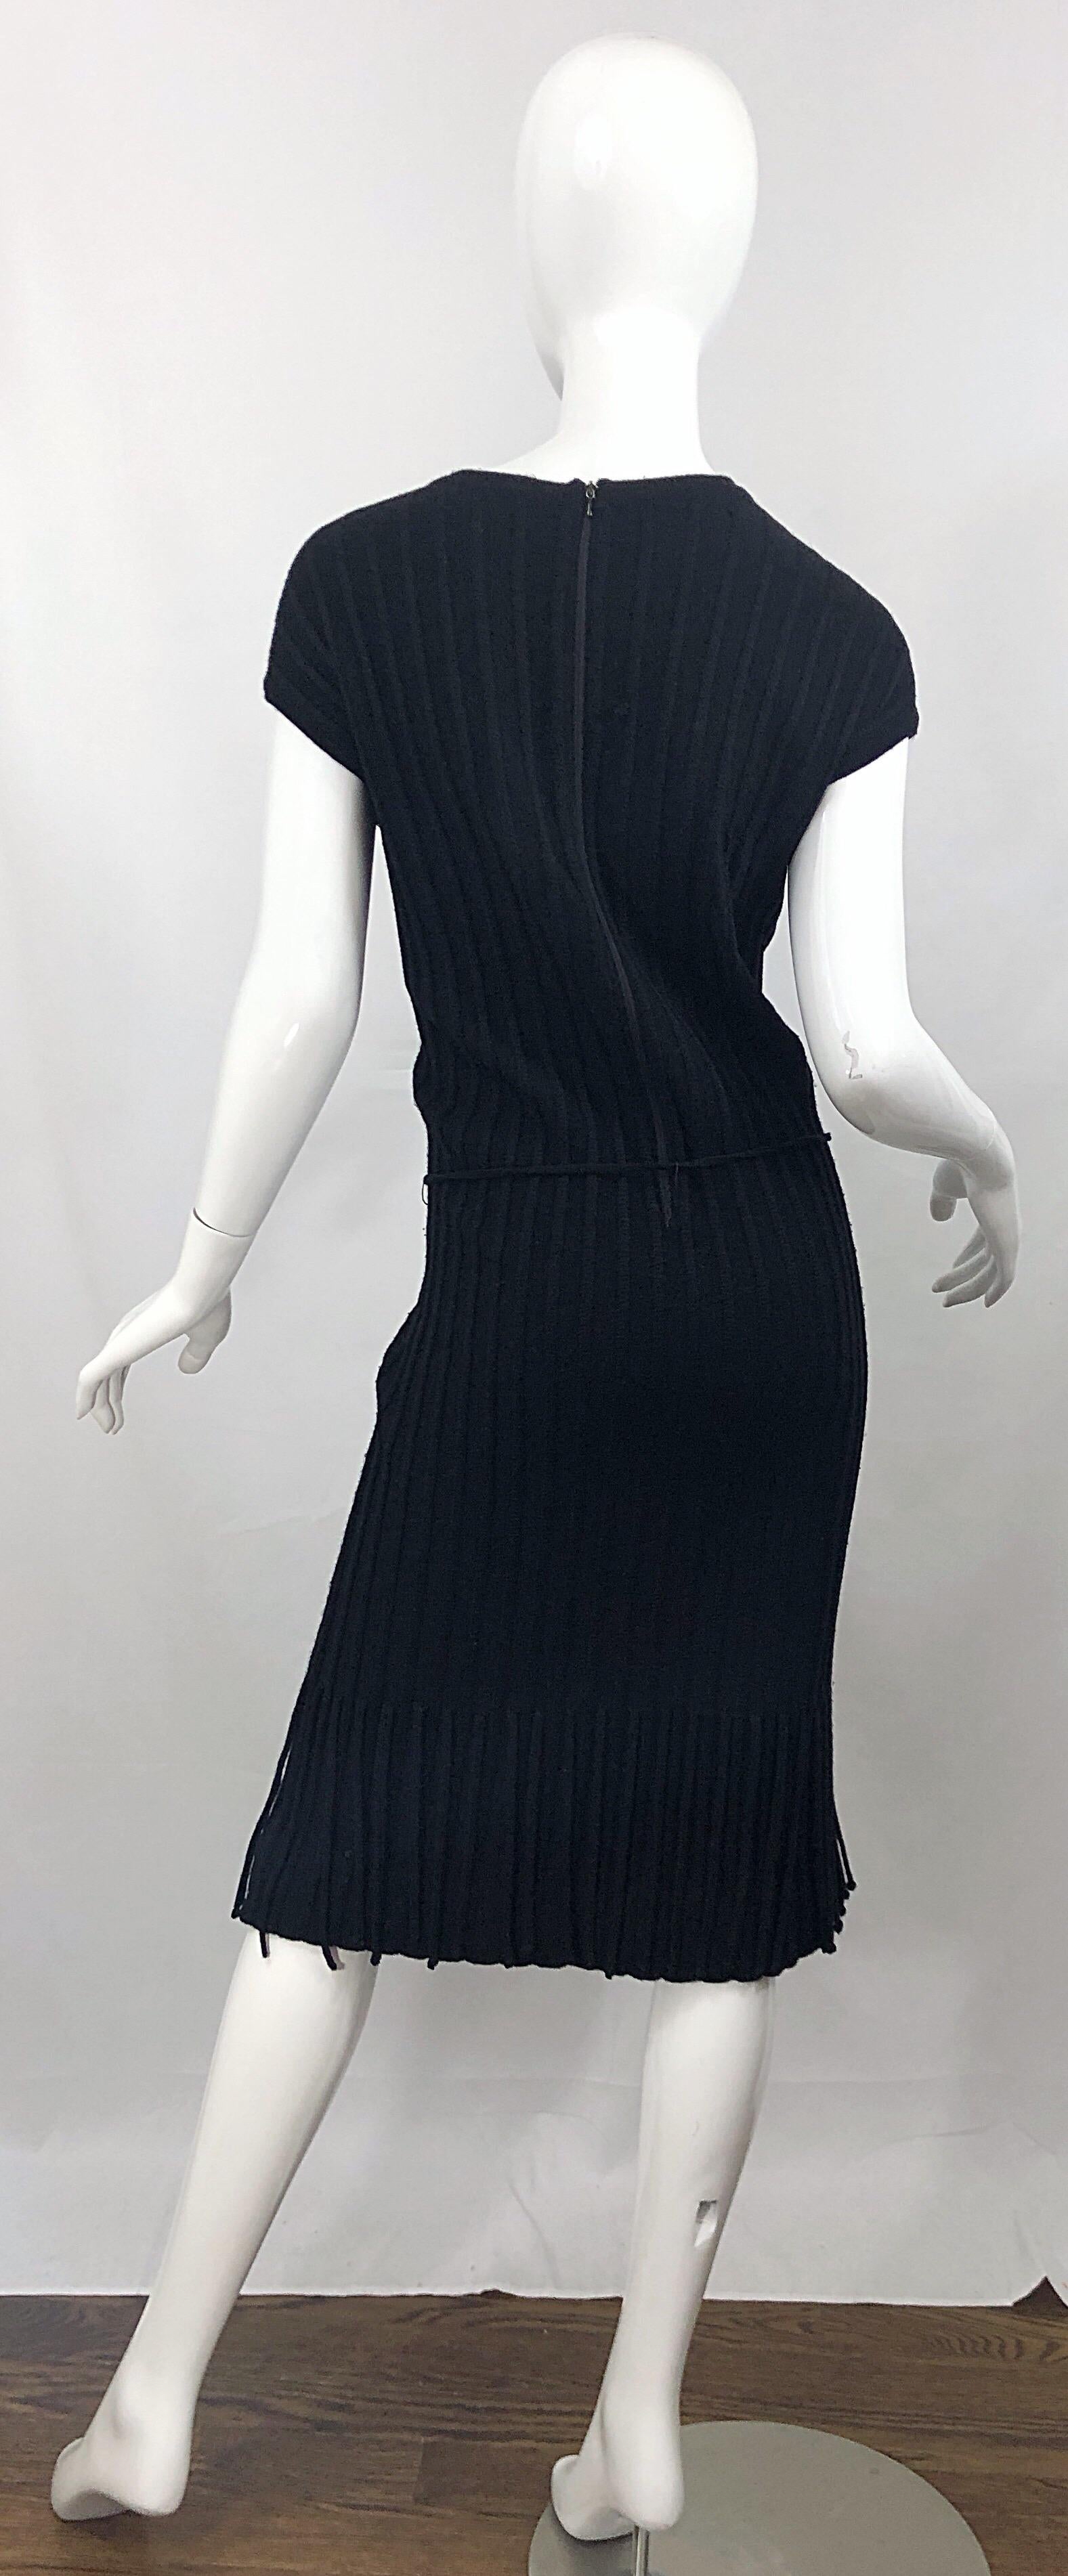 Oleg Cassini 1960s Large Size Black Carwash Hem Flapper Style Vintage Wool Dress In Good Condition For Sale In San Diego, CA